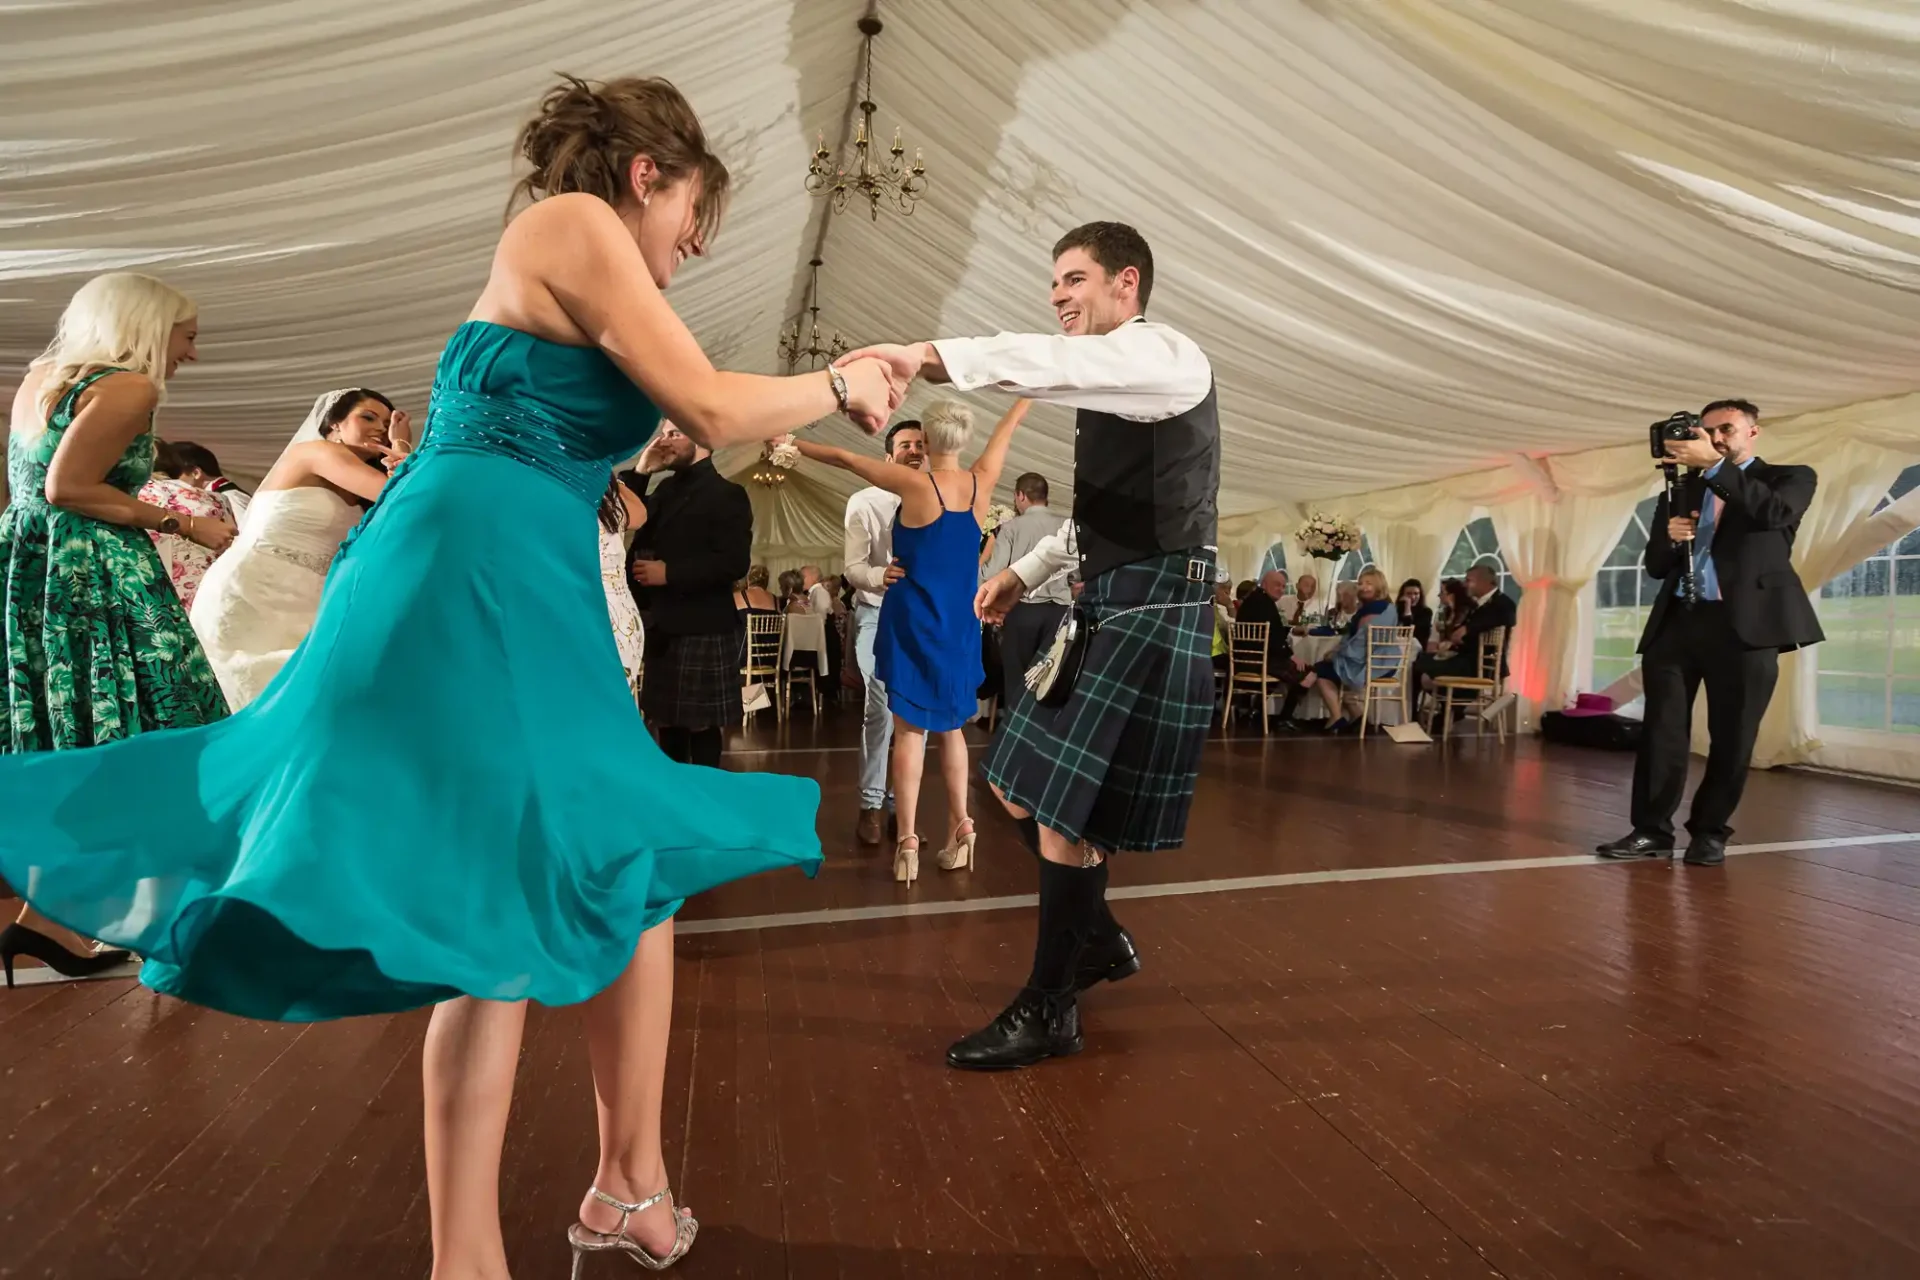 A couple dances joyfully in a tent at a wedding reception, the man in a kilt and the woman in a teal dress, while guests and a photographer watch.